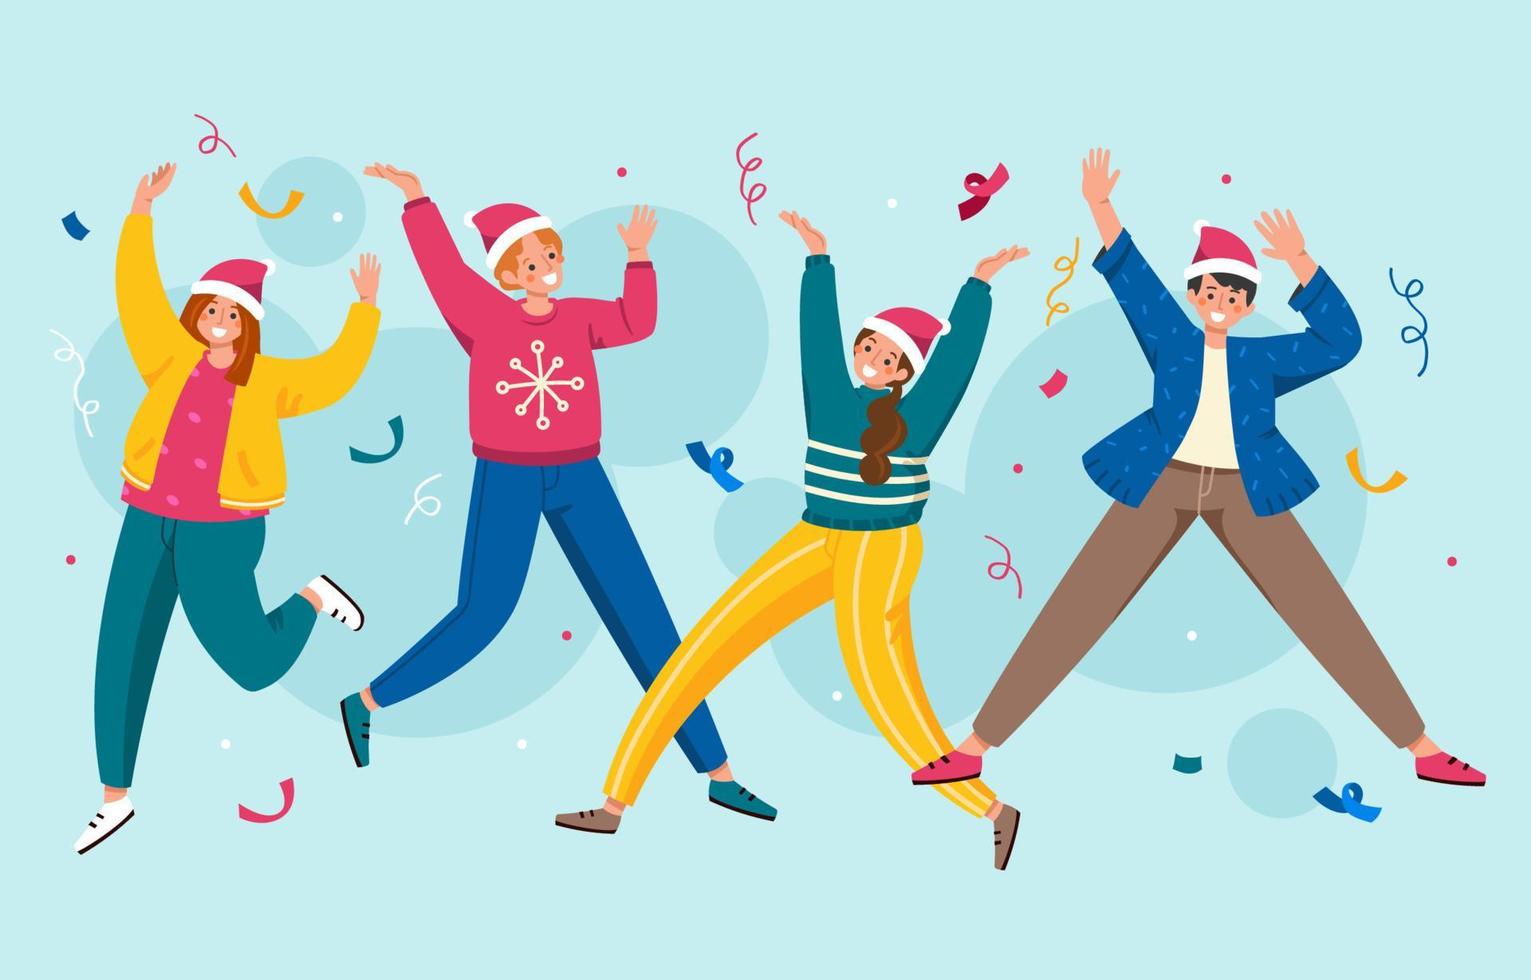 Jumping People Celebrating Christmas vector